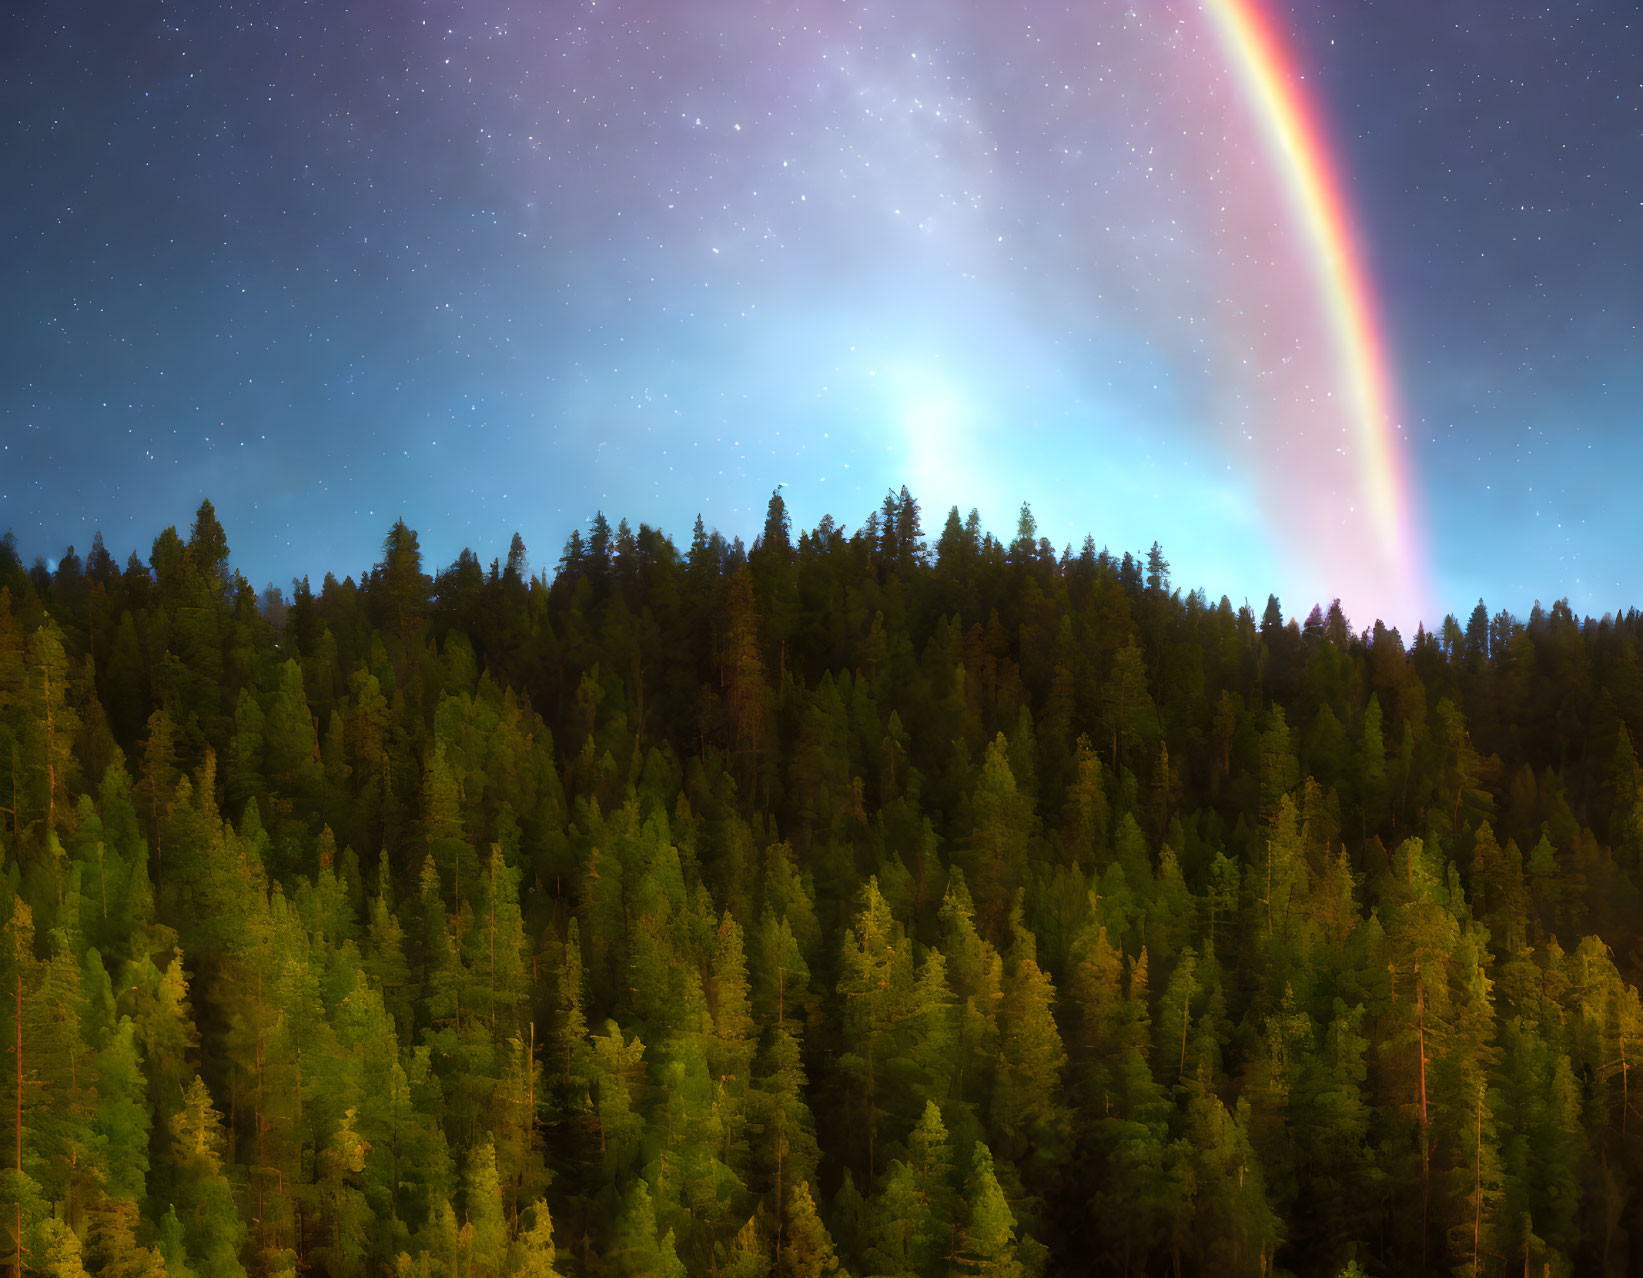 Starry Night Sky with Rainbow over Dense Evergreen Forest